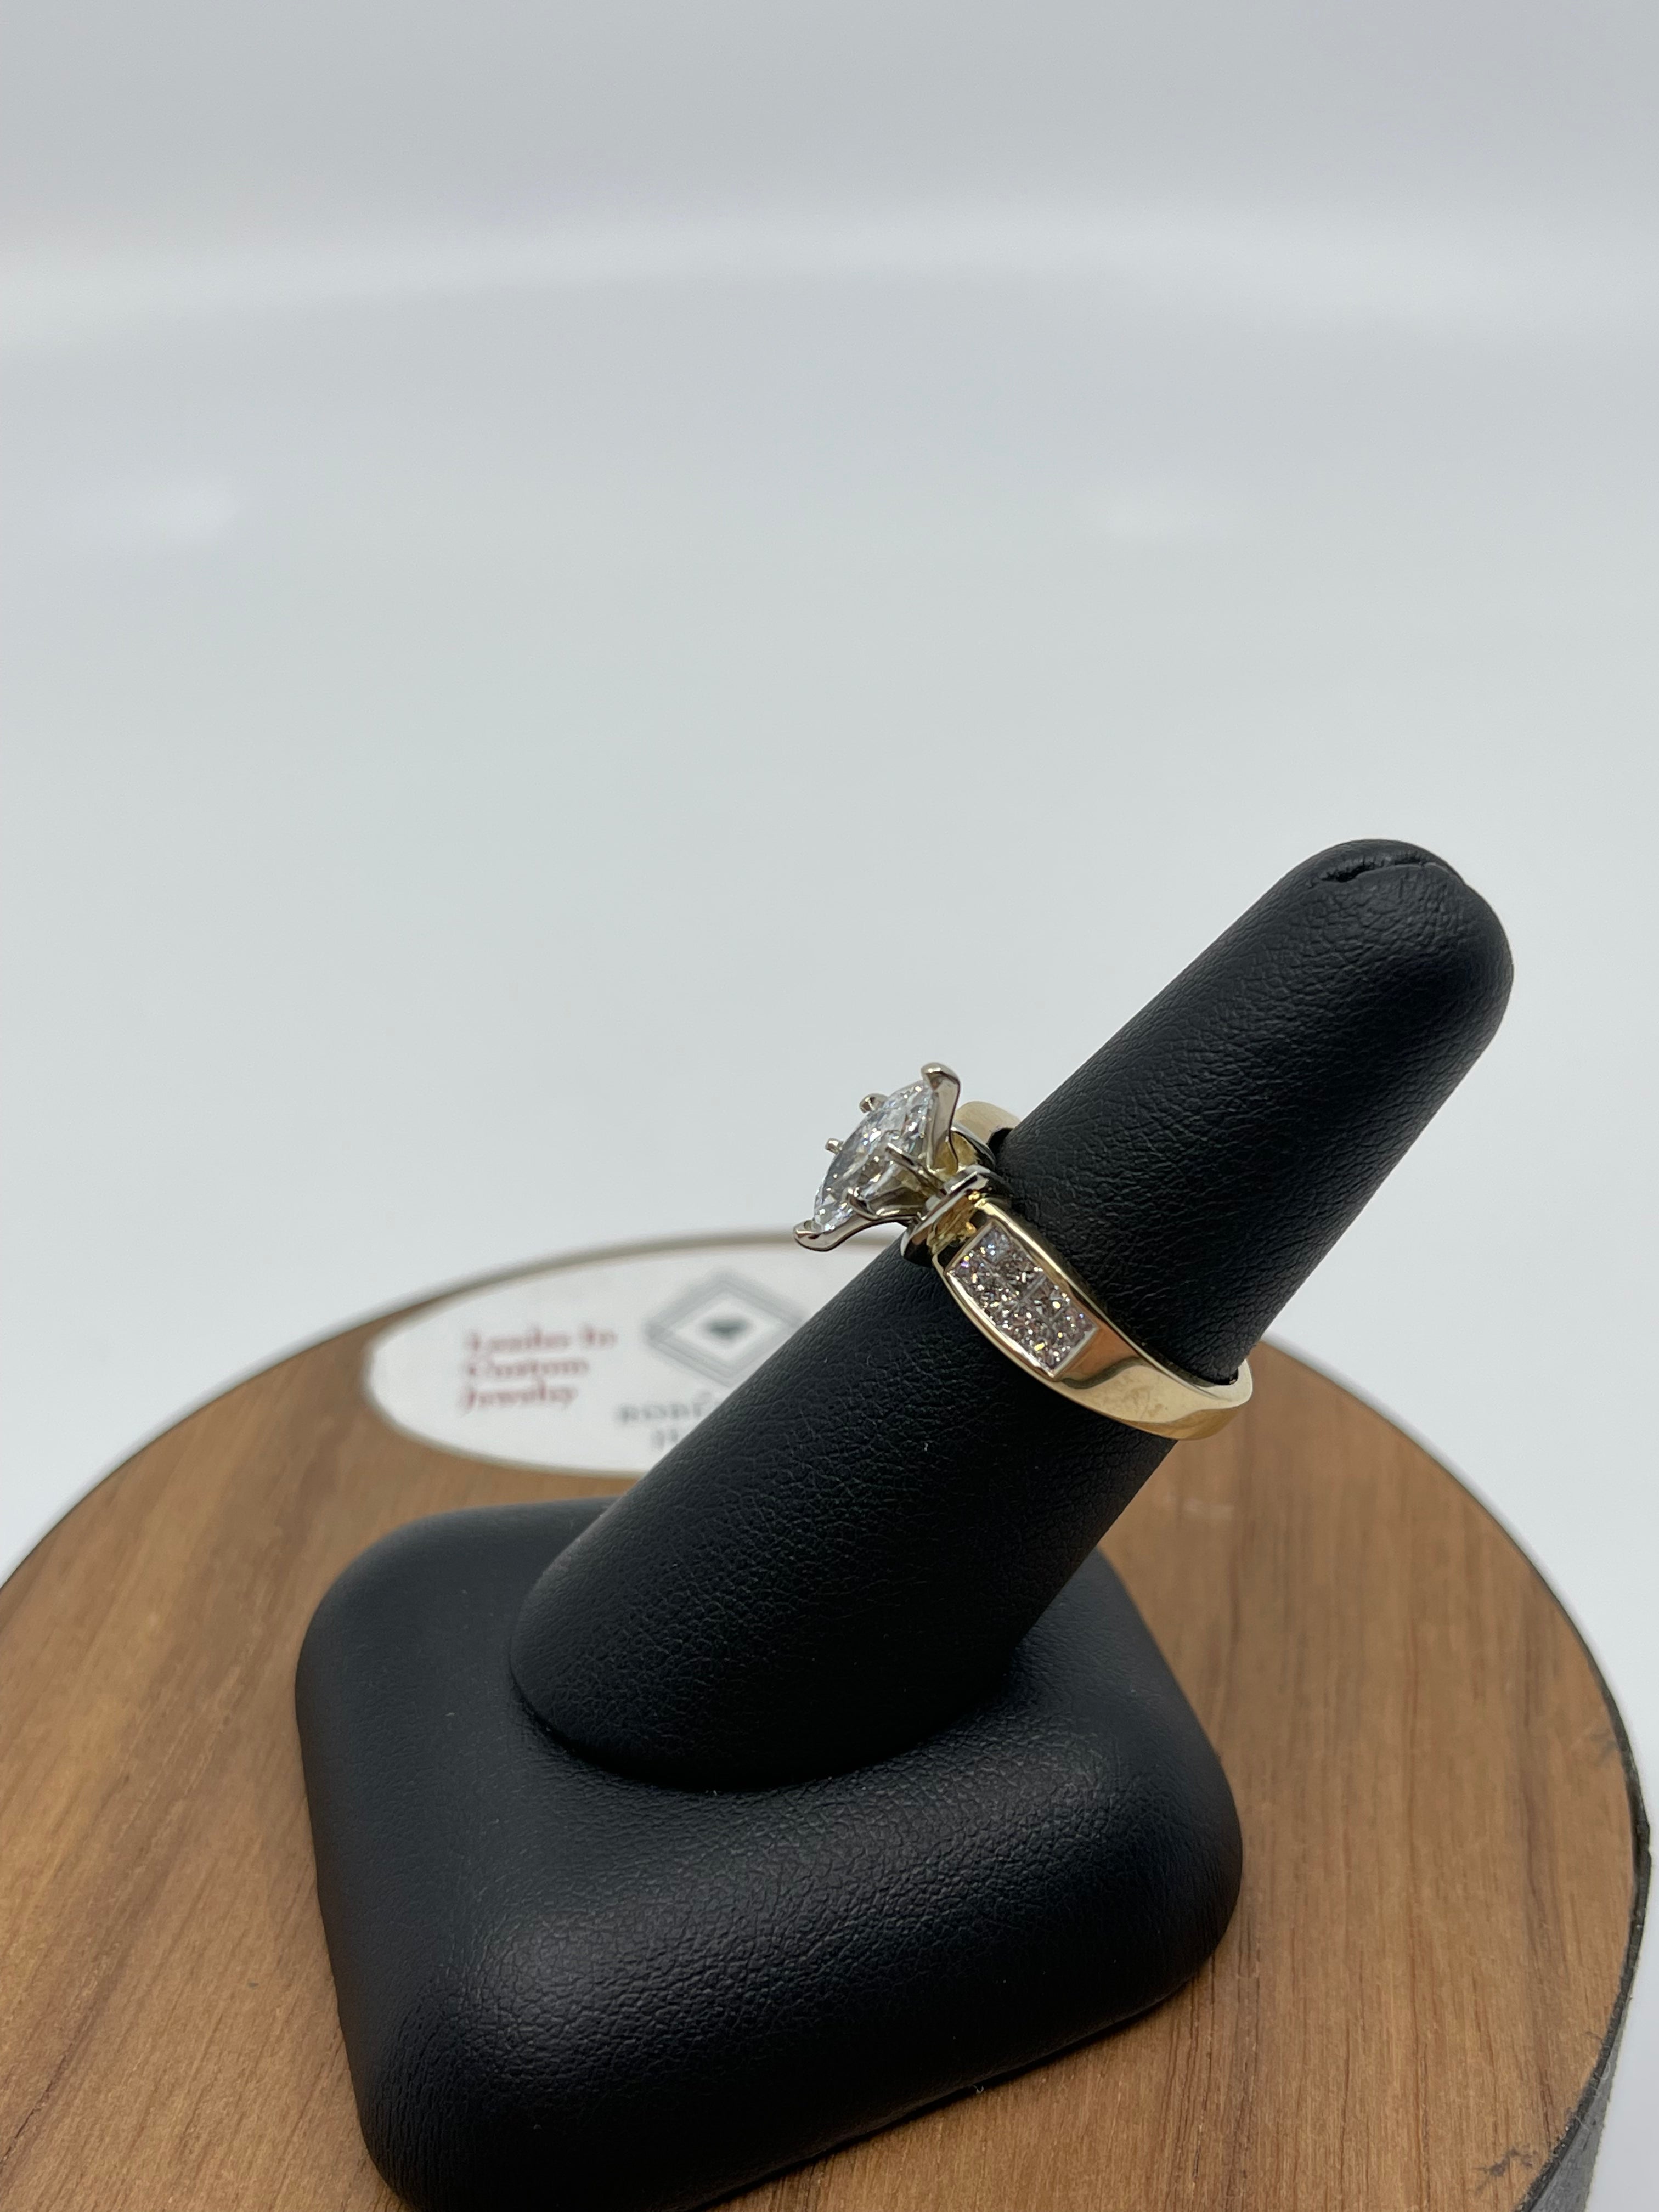 14K Yellow Gold 0.75 Carat Marquise Cut Diamond VS2 Clarity Engagement Ring with VS1 Side Diamonds